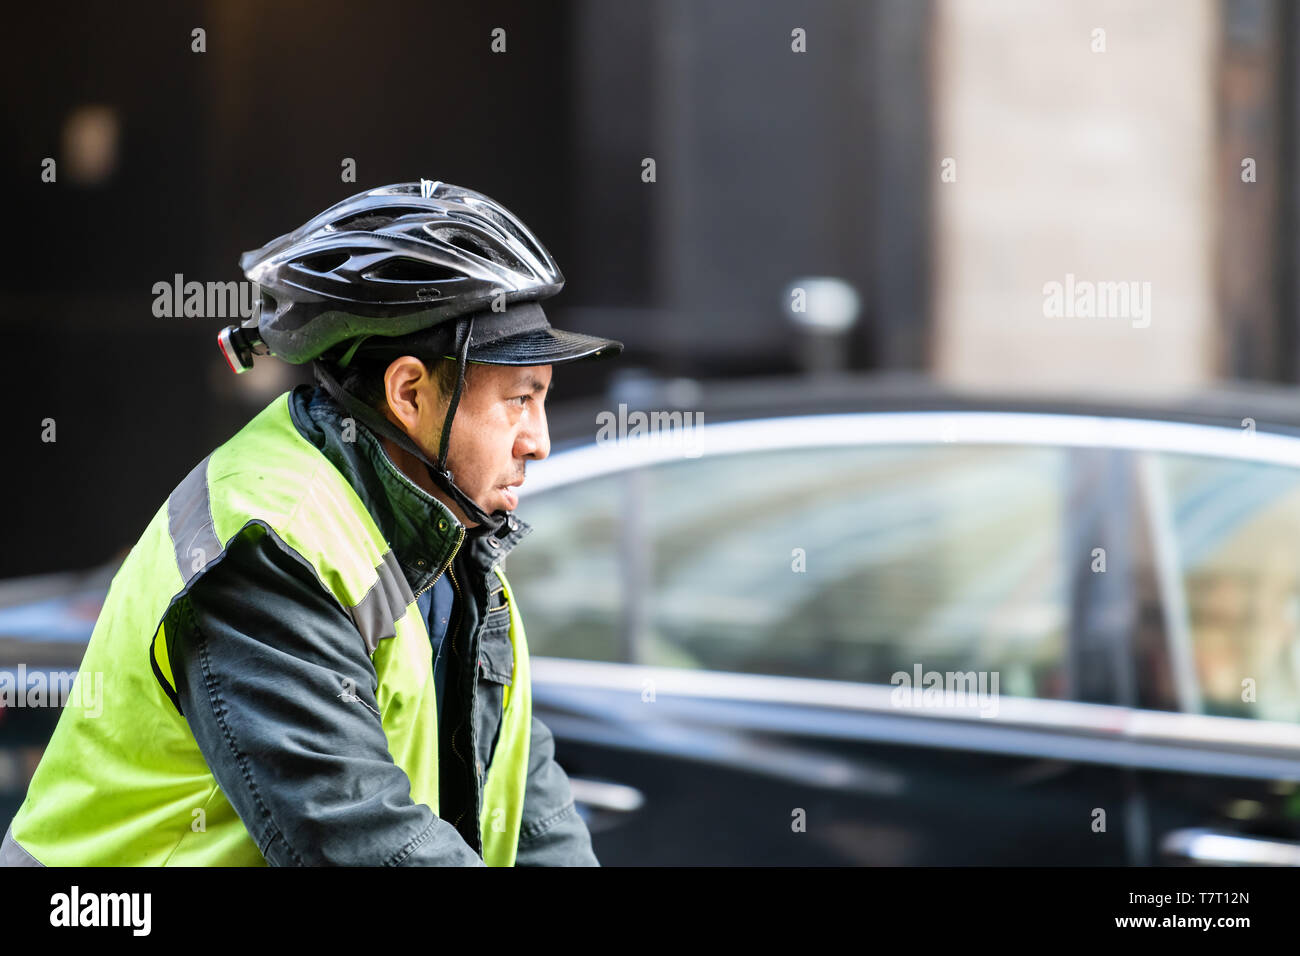 New York City - April 6, 2018: People man on bicycle bike with helmet and vest in NYC midtown Stock Photo